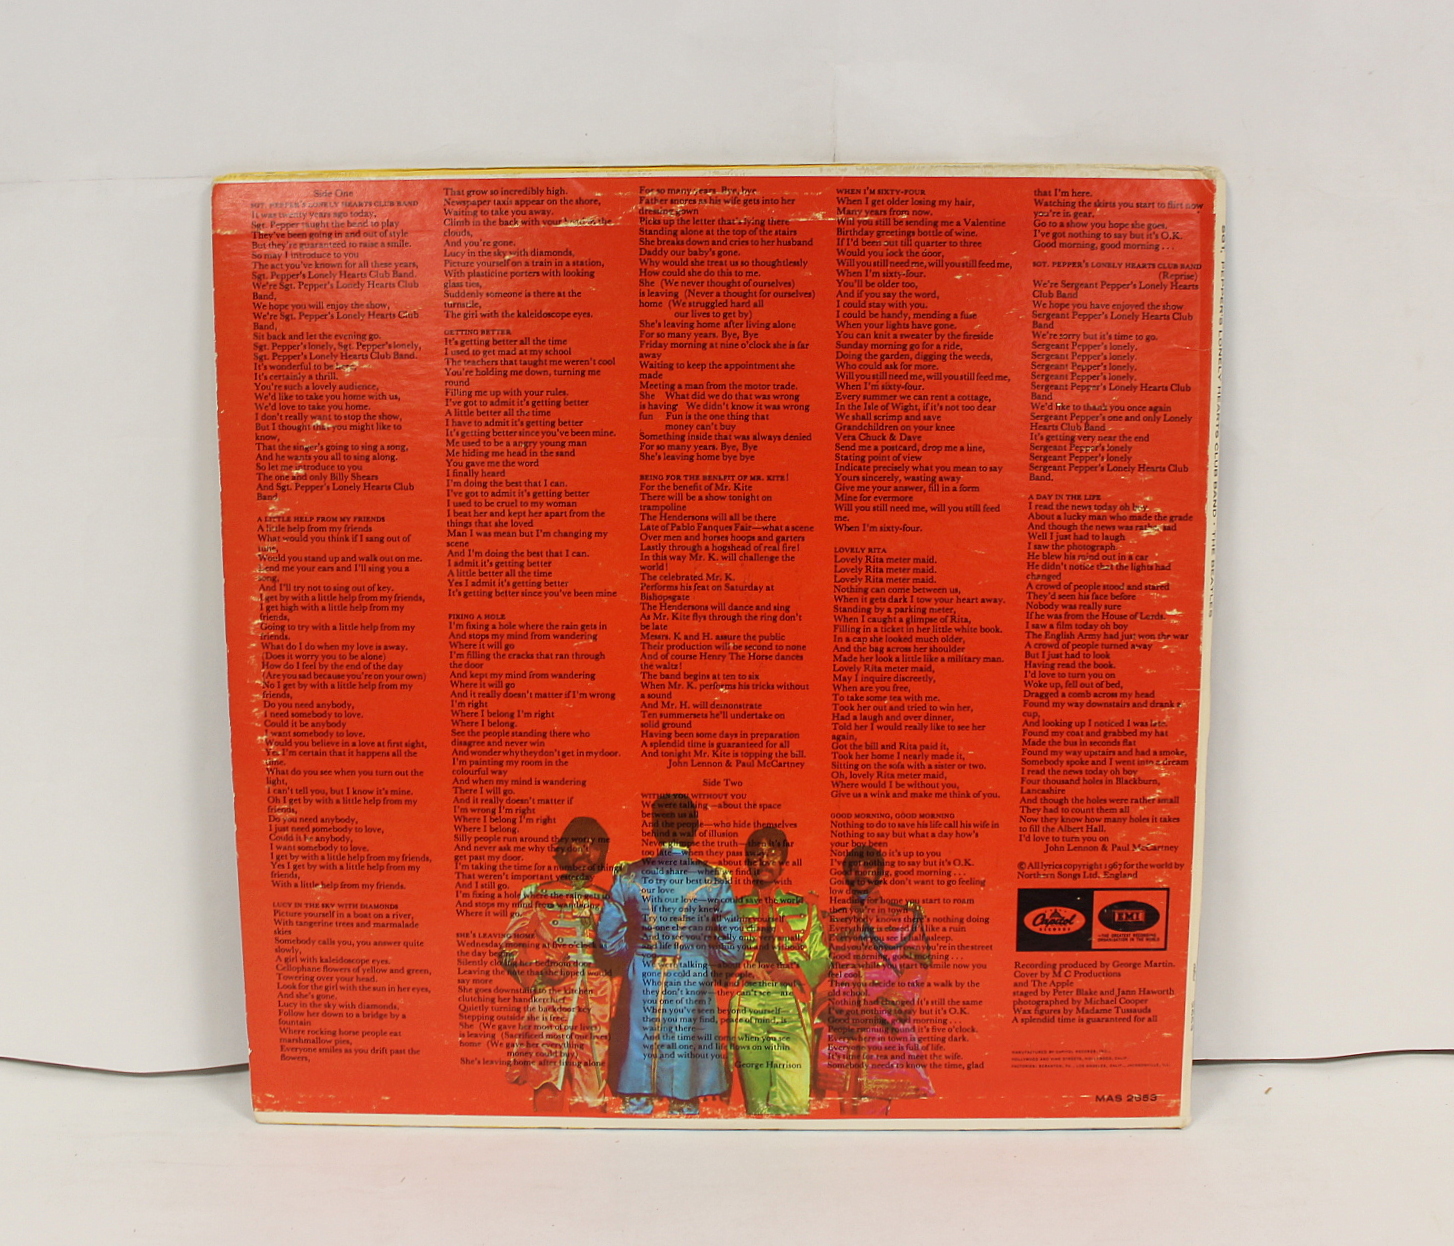 Beatles 'Sgt Pepper' LP, US pressing, with flame inner and insert and rainbow rim label. Without the - Image 2 of 6